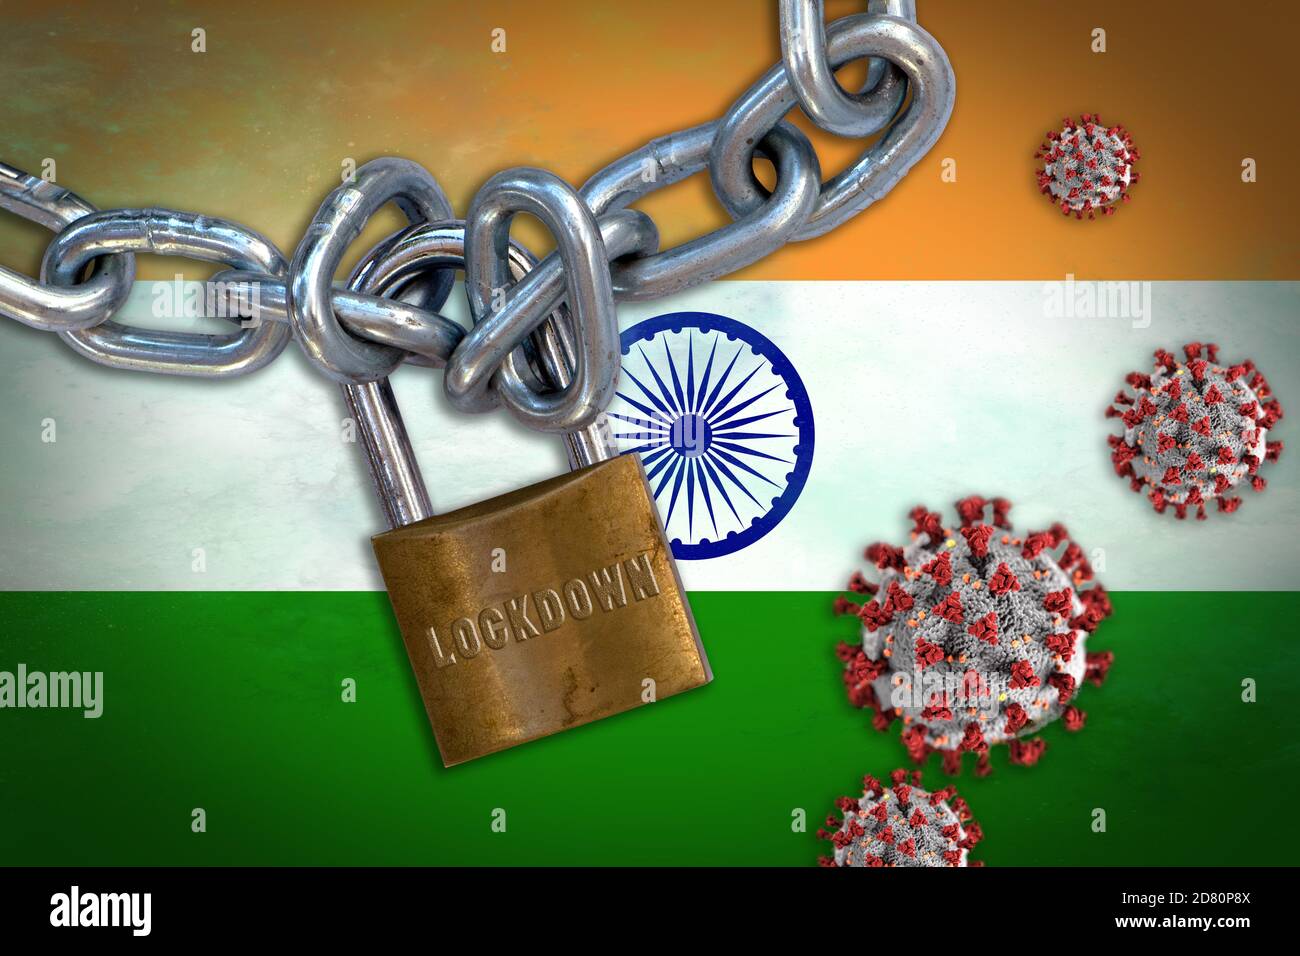 Concept of Coronavirus lockdown in India, with Covid-19 particles overshadowing flag of India. Stock Photo